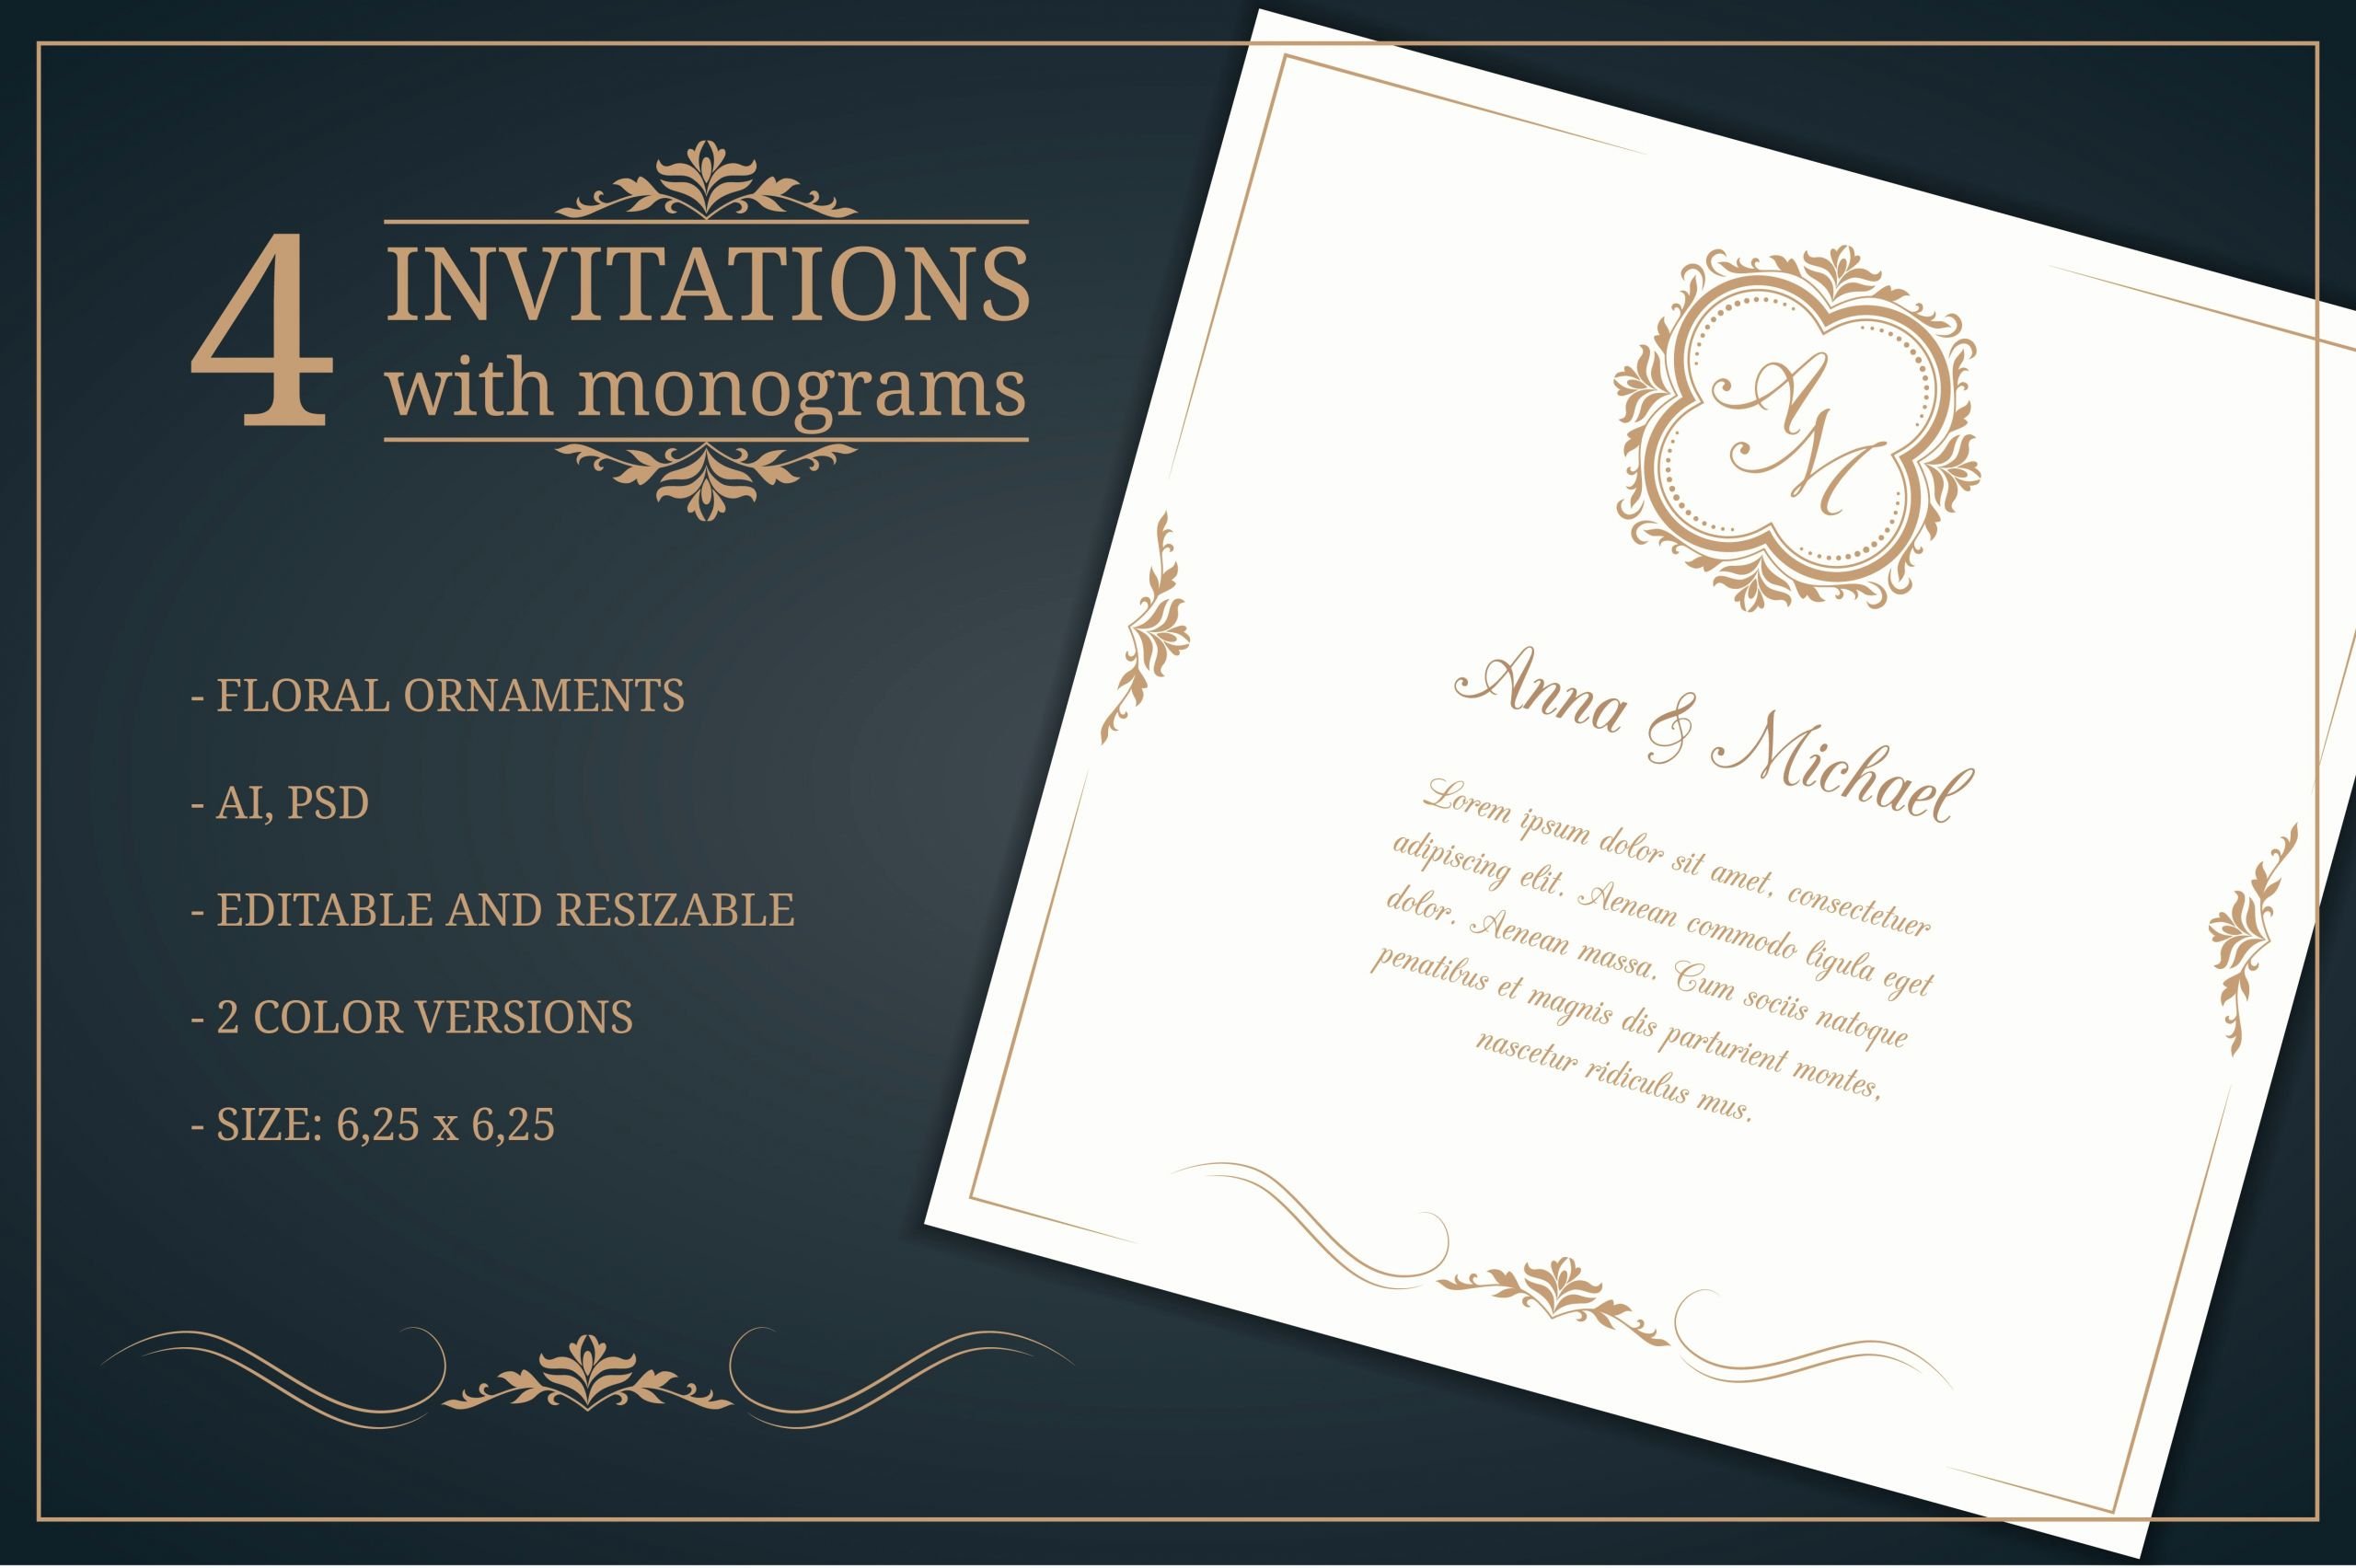 Free Wedding Invitation Template Awesome Wedding Invitations with Monograms Wedding Templates